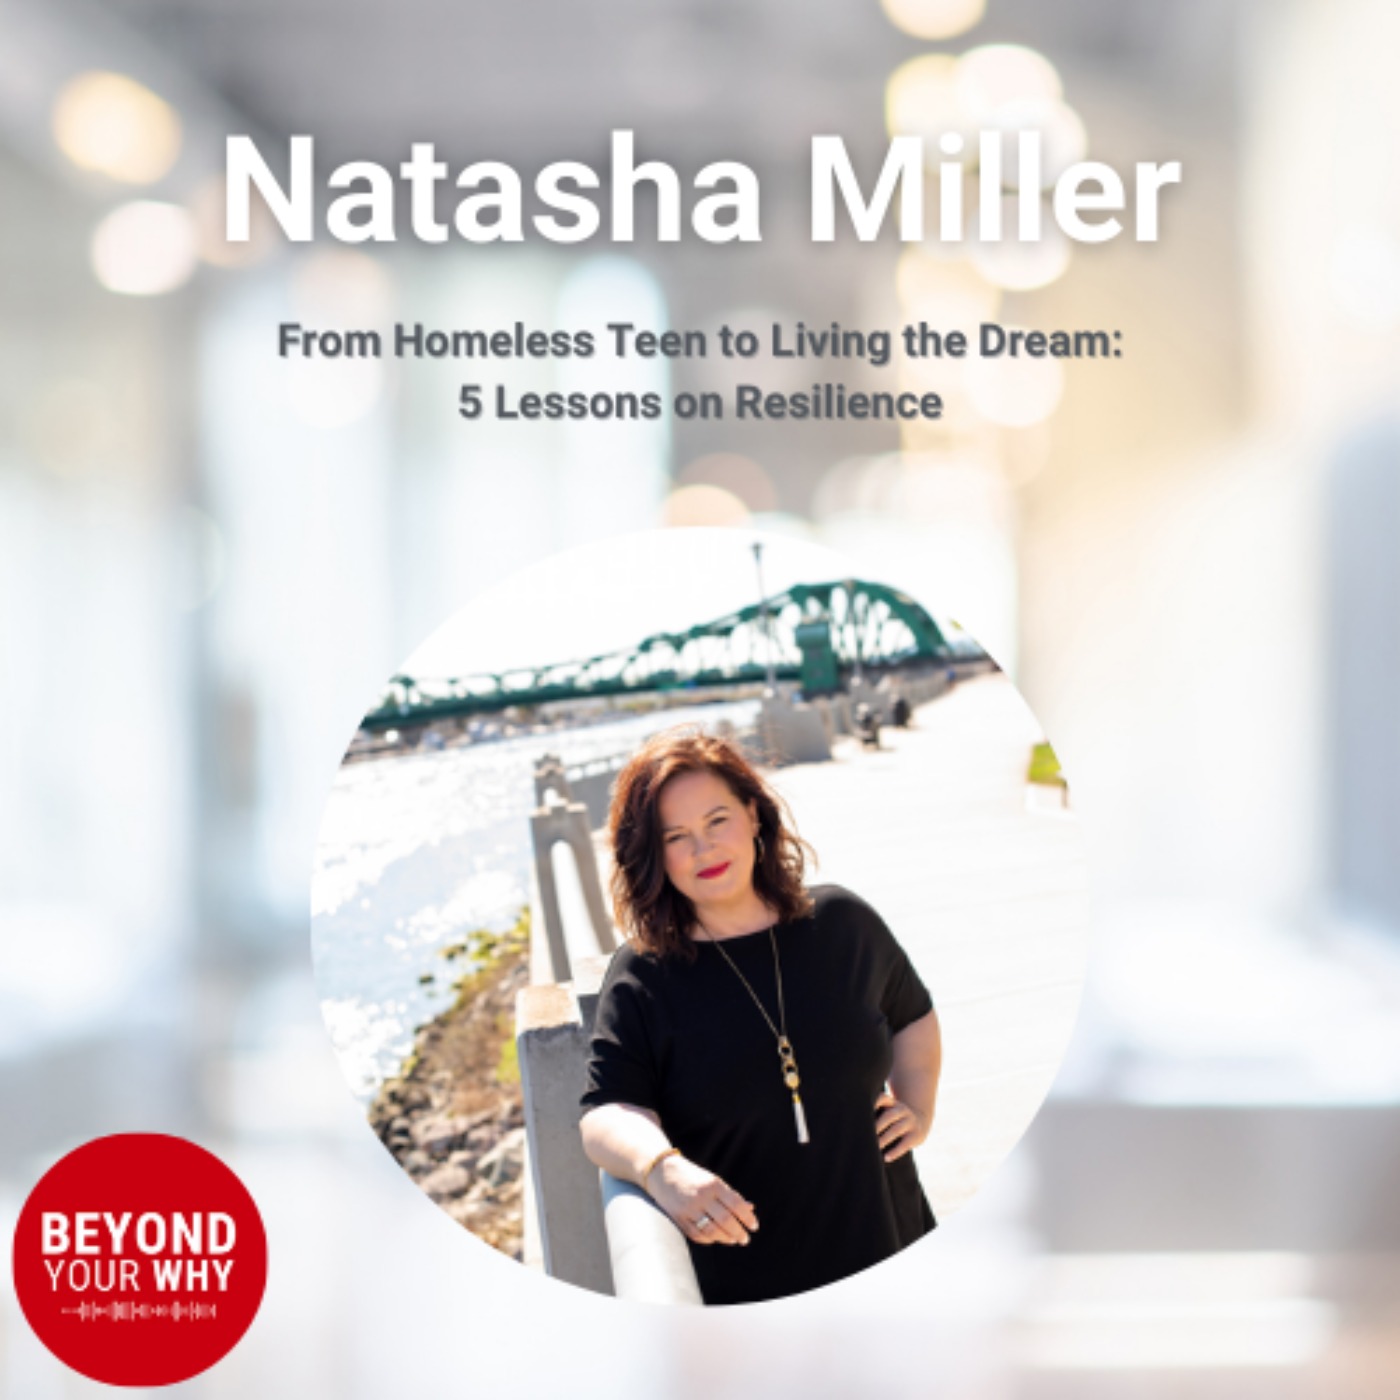 From Homeless Teen to Living the Dream: 5 Lessons on Resilience with Natasha Miller